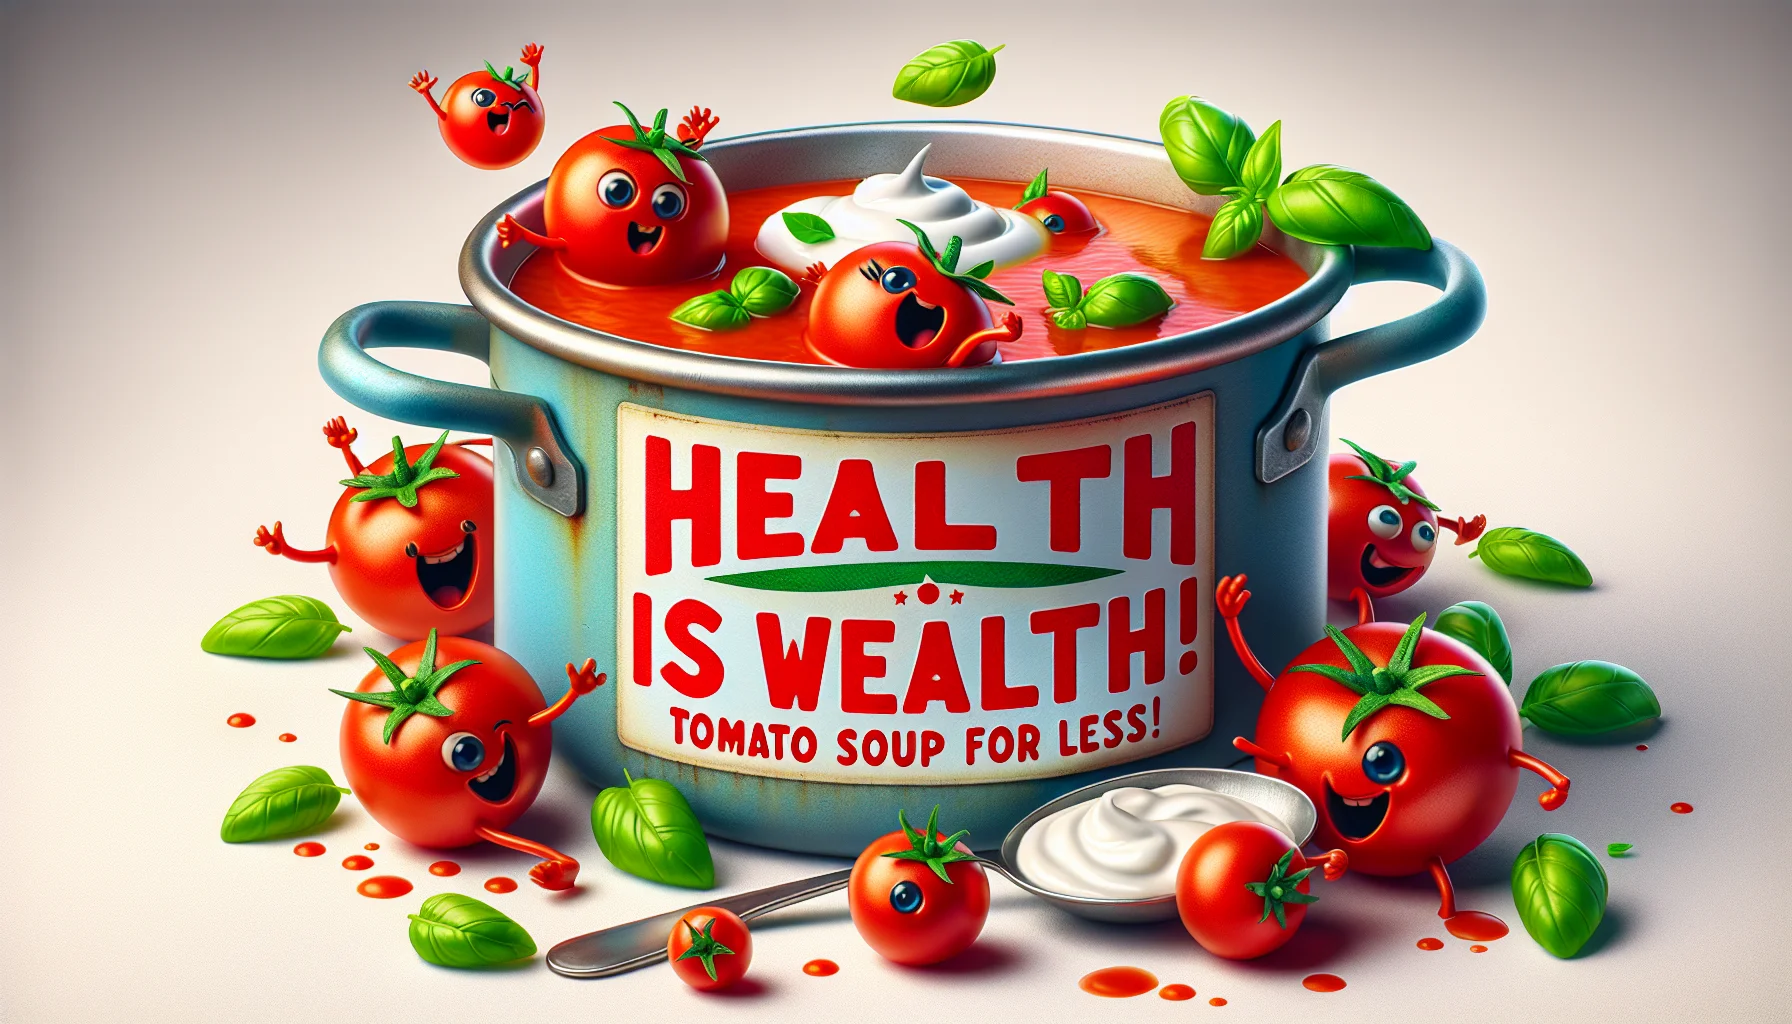 Generate a humorous and attractive image that depicts a pot of cherry tomato soup engaged in a comedic scene. The soup is garnished with fresh basil leaves and a dab of sour cream. Show small, ripe cherry tomatoes playfully bounding into the pot, portraying the ingredients' enthusiasm to become part of the healthy meal. A catchy slogan like 'Health is Wealth, Tomato Soup for less!' is displayed in friendly, colorful letters encouraging viewers to eat healthily and economically.